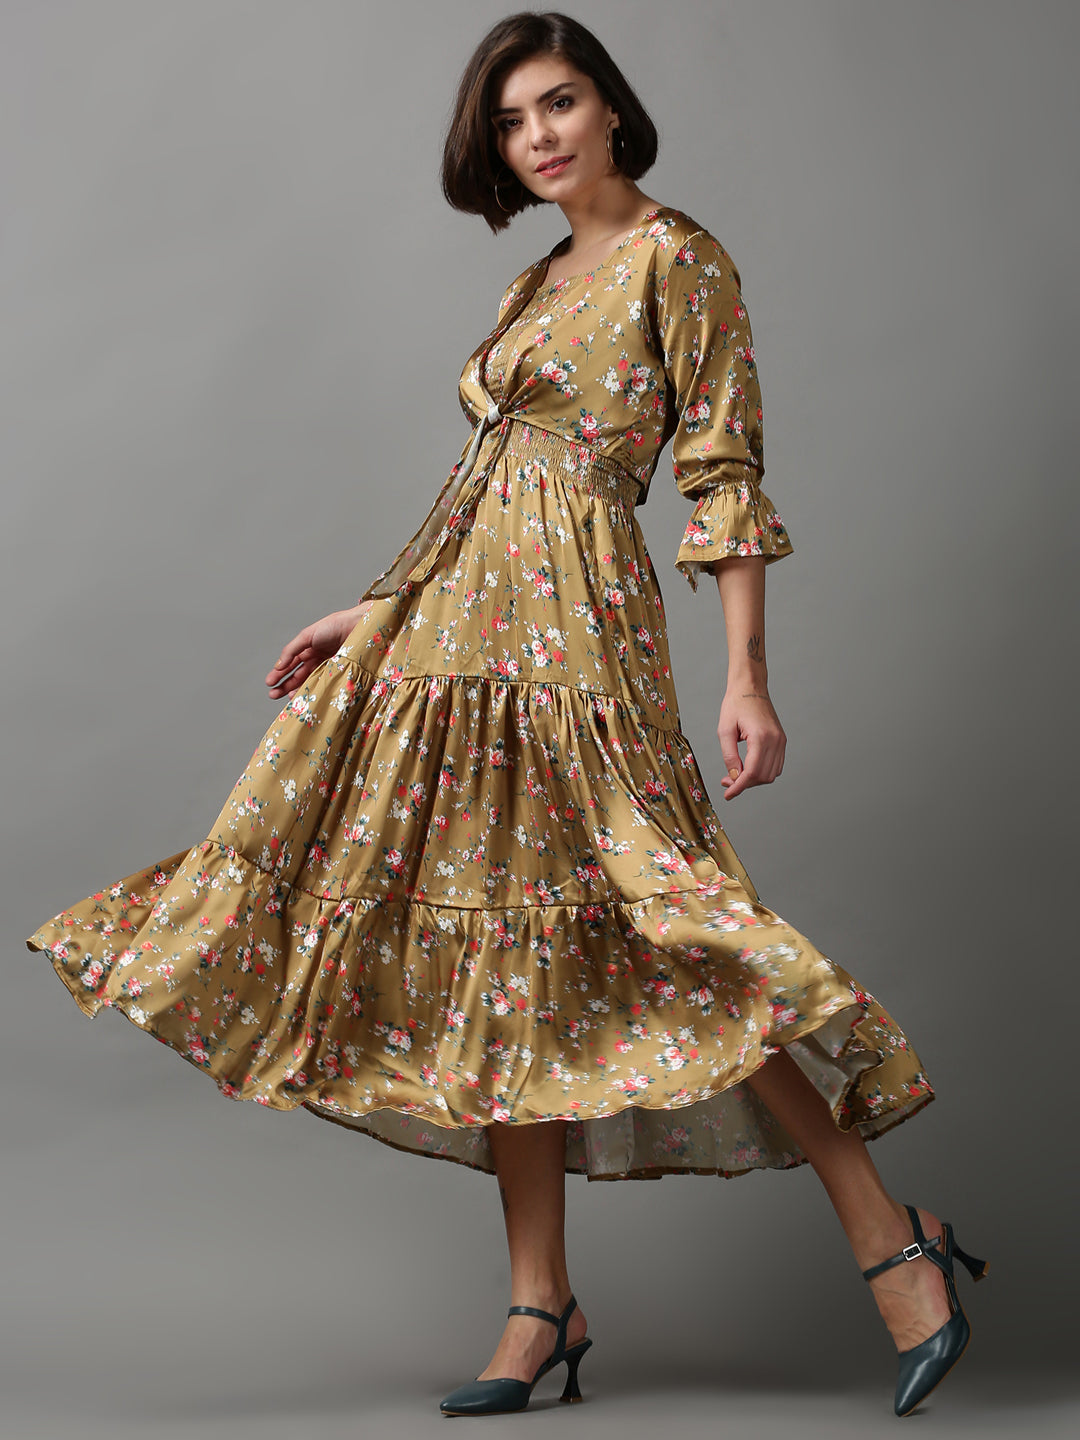 Women's Beige Printed Fit and Flare Dress